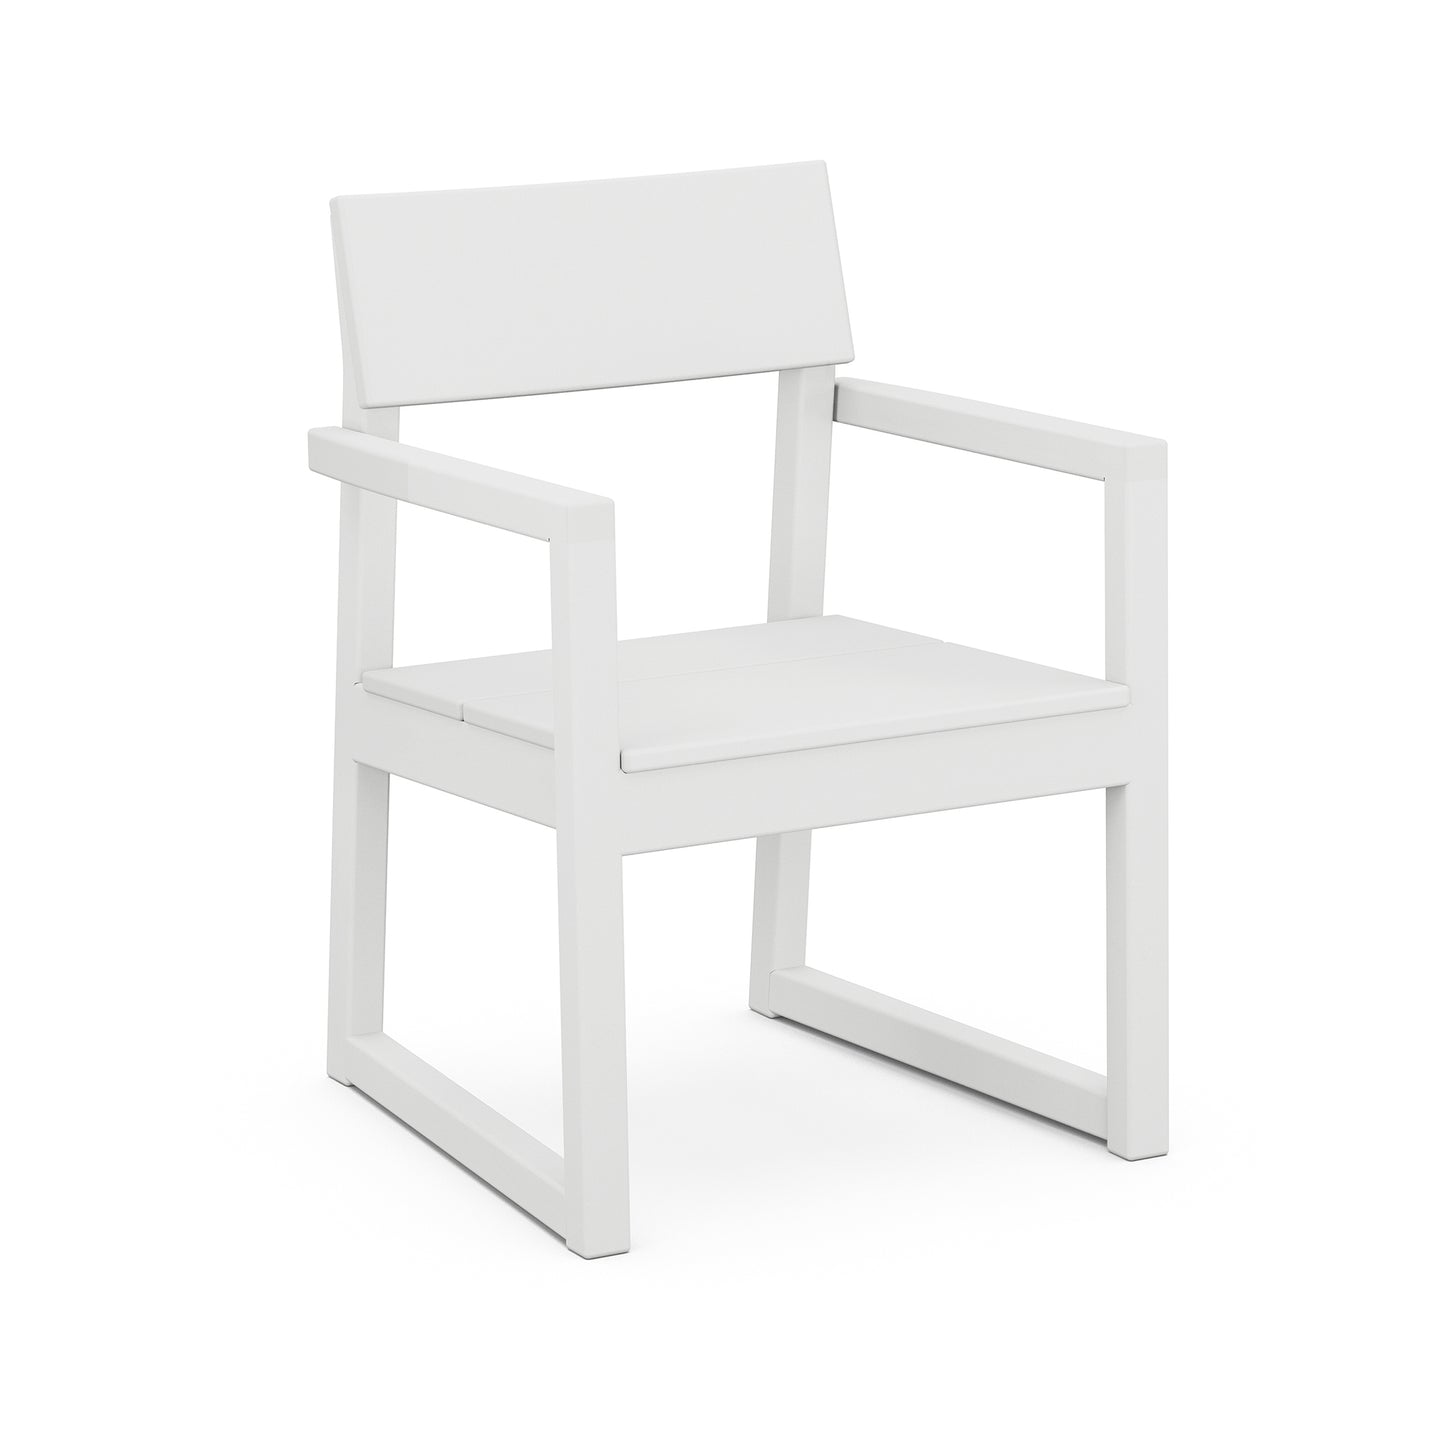 A minimalist white outdoor dining chair featuring a square seat, a flat backrest, and angular legs crafted from POLYWOOD lumber, isolated on a white background.